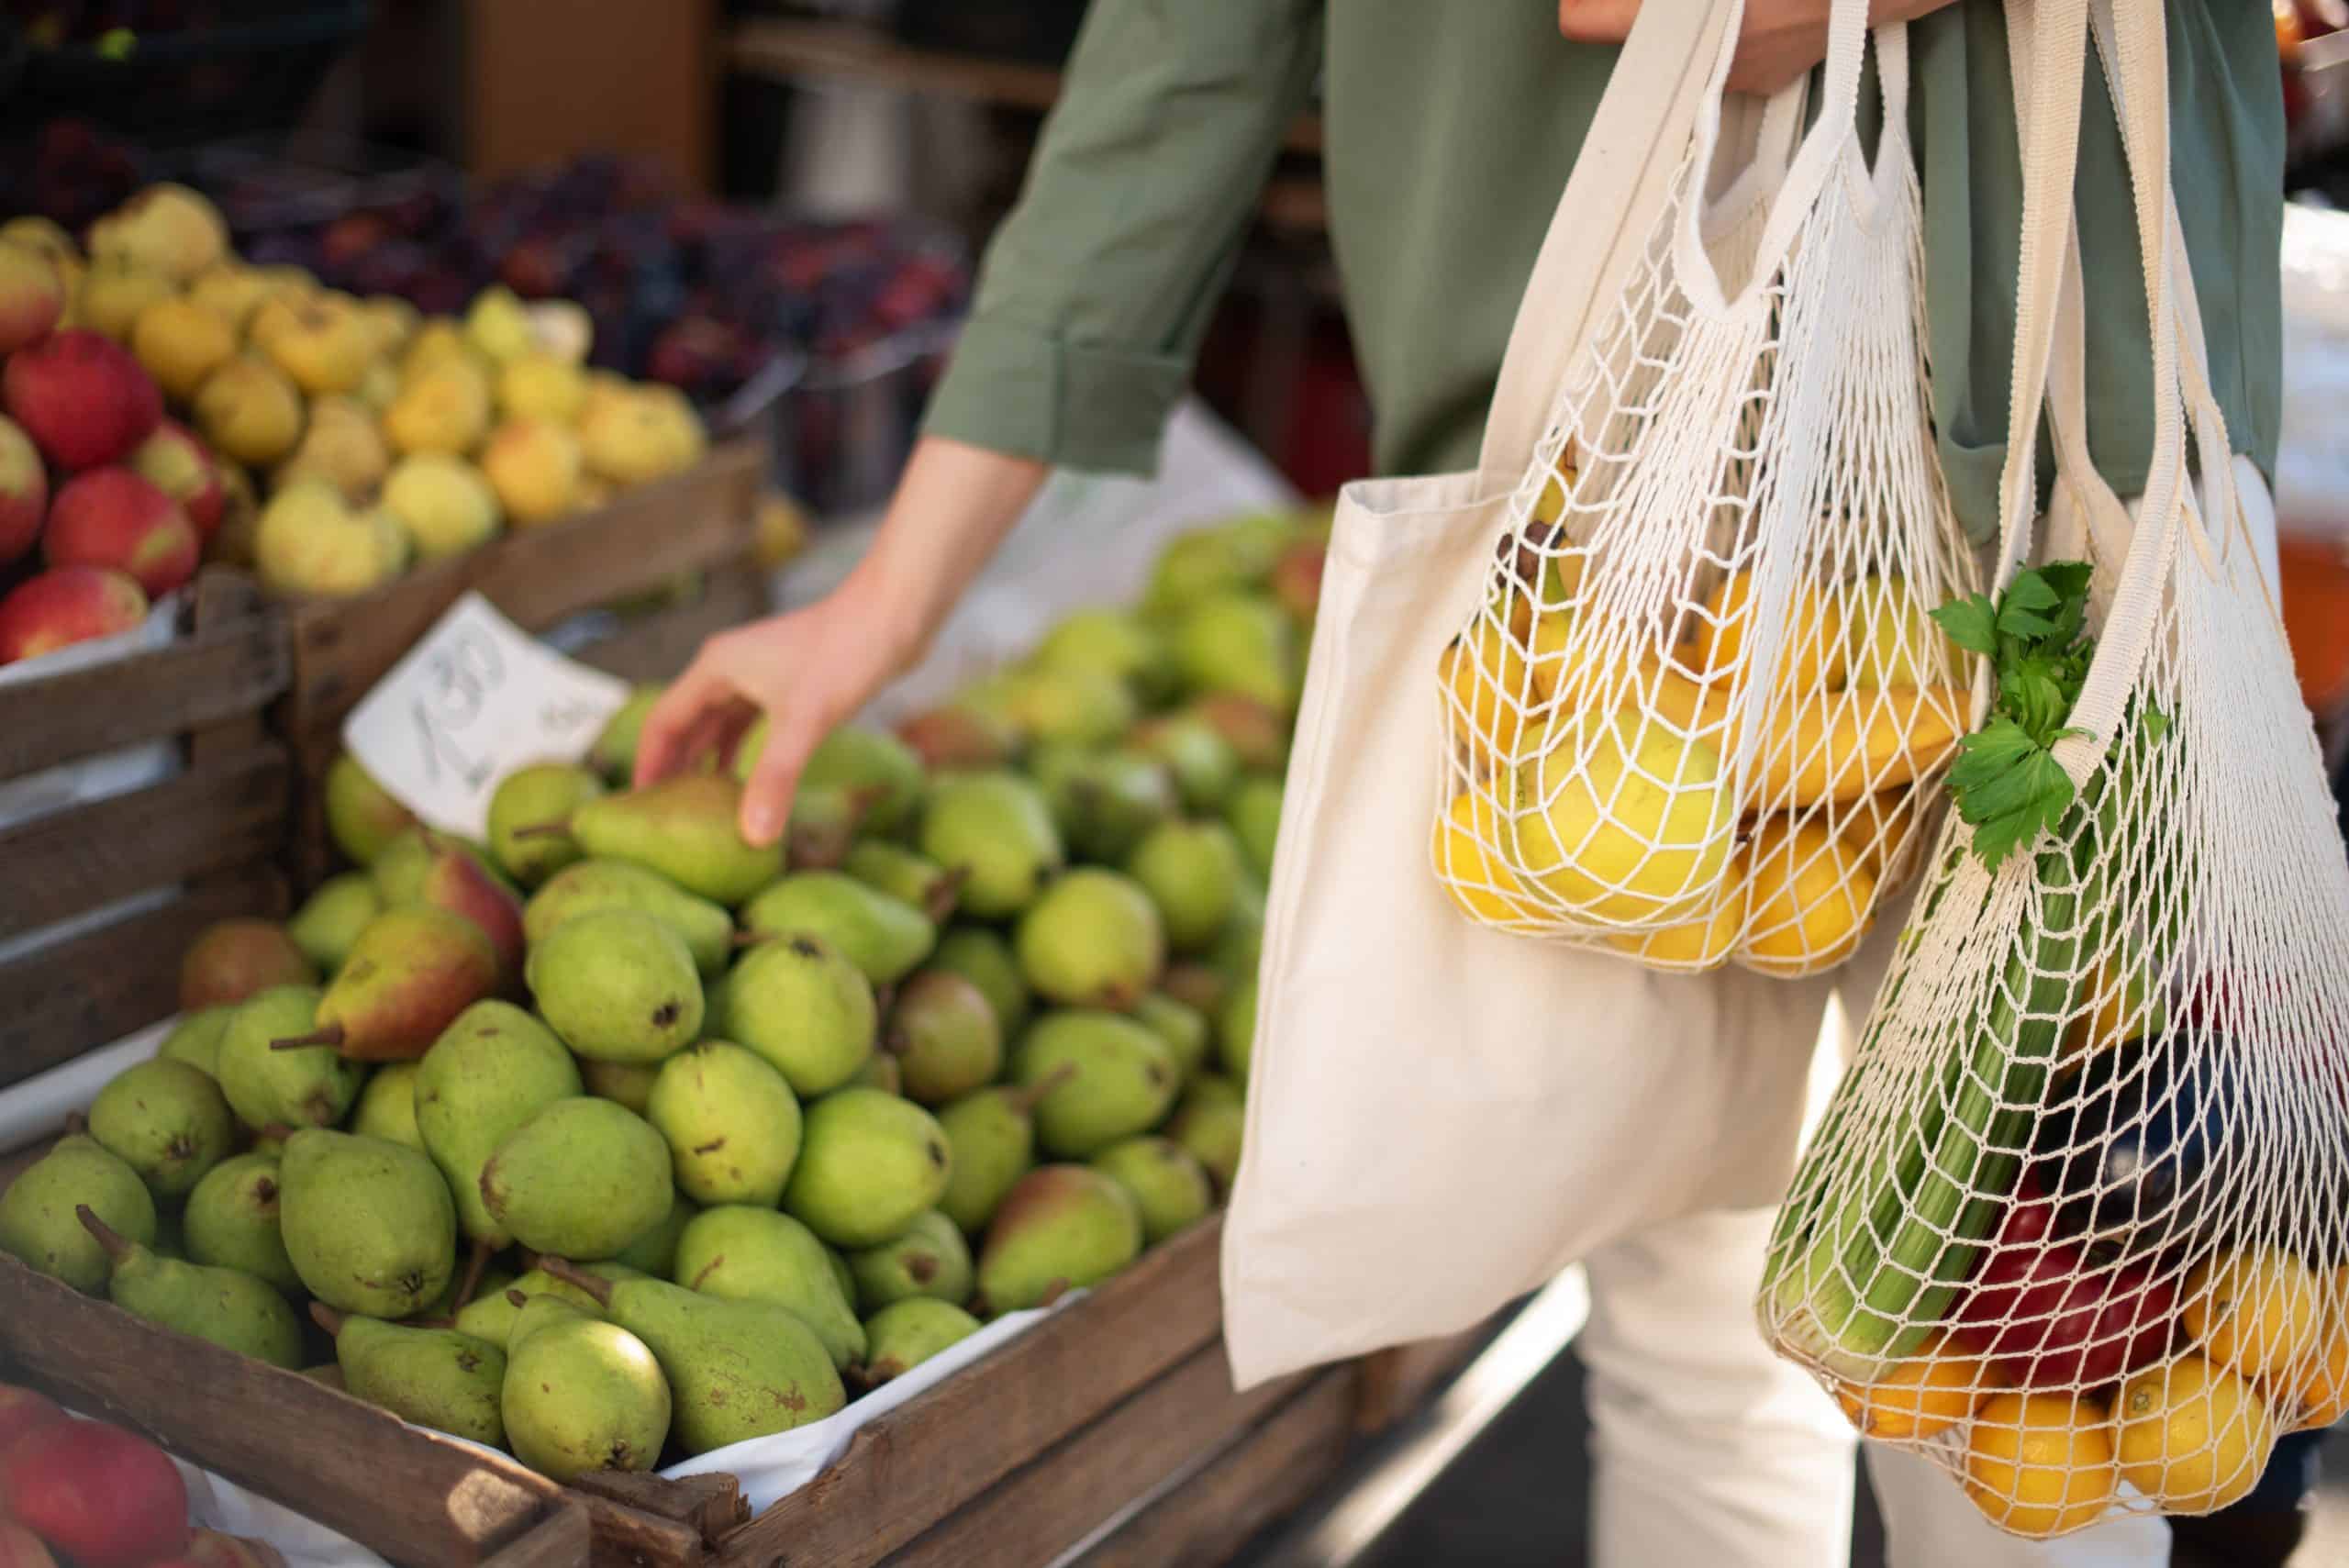 Woman using reusable bags for produce